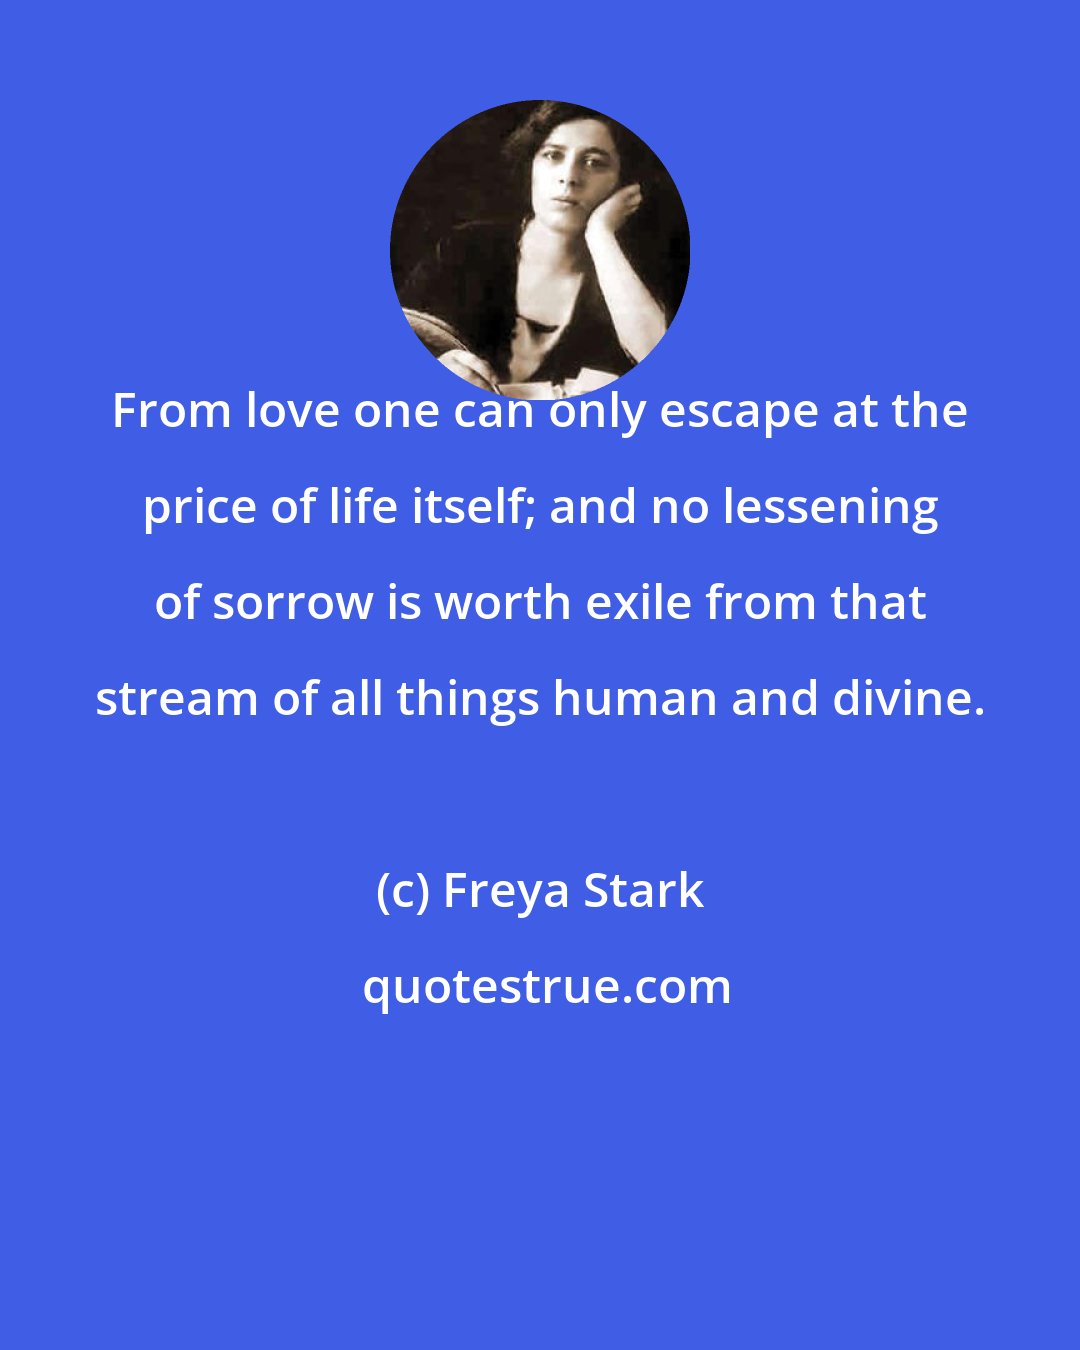 Freya Stark: From love one can only escape at the price of life itself; and no lessening of sorrow is worth exile from that stream of all things human and divine.